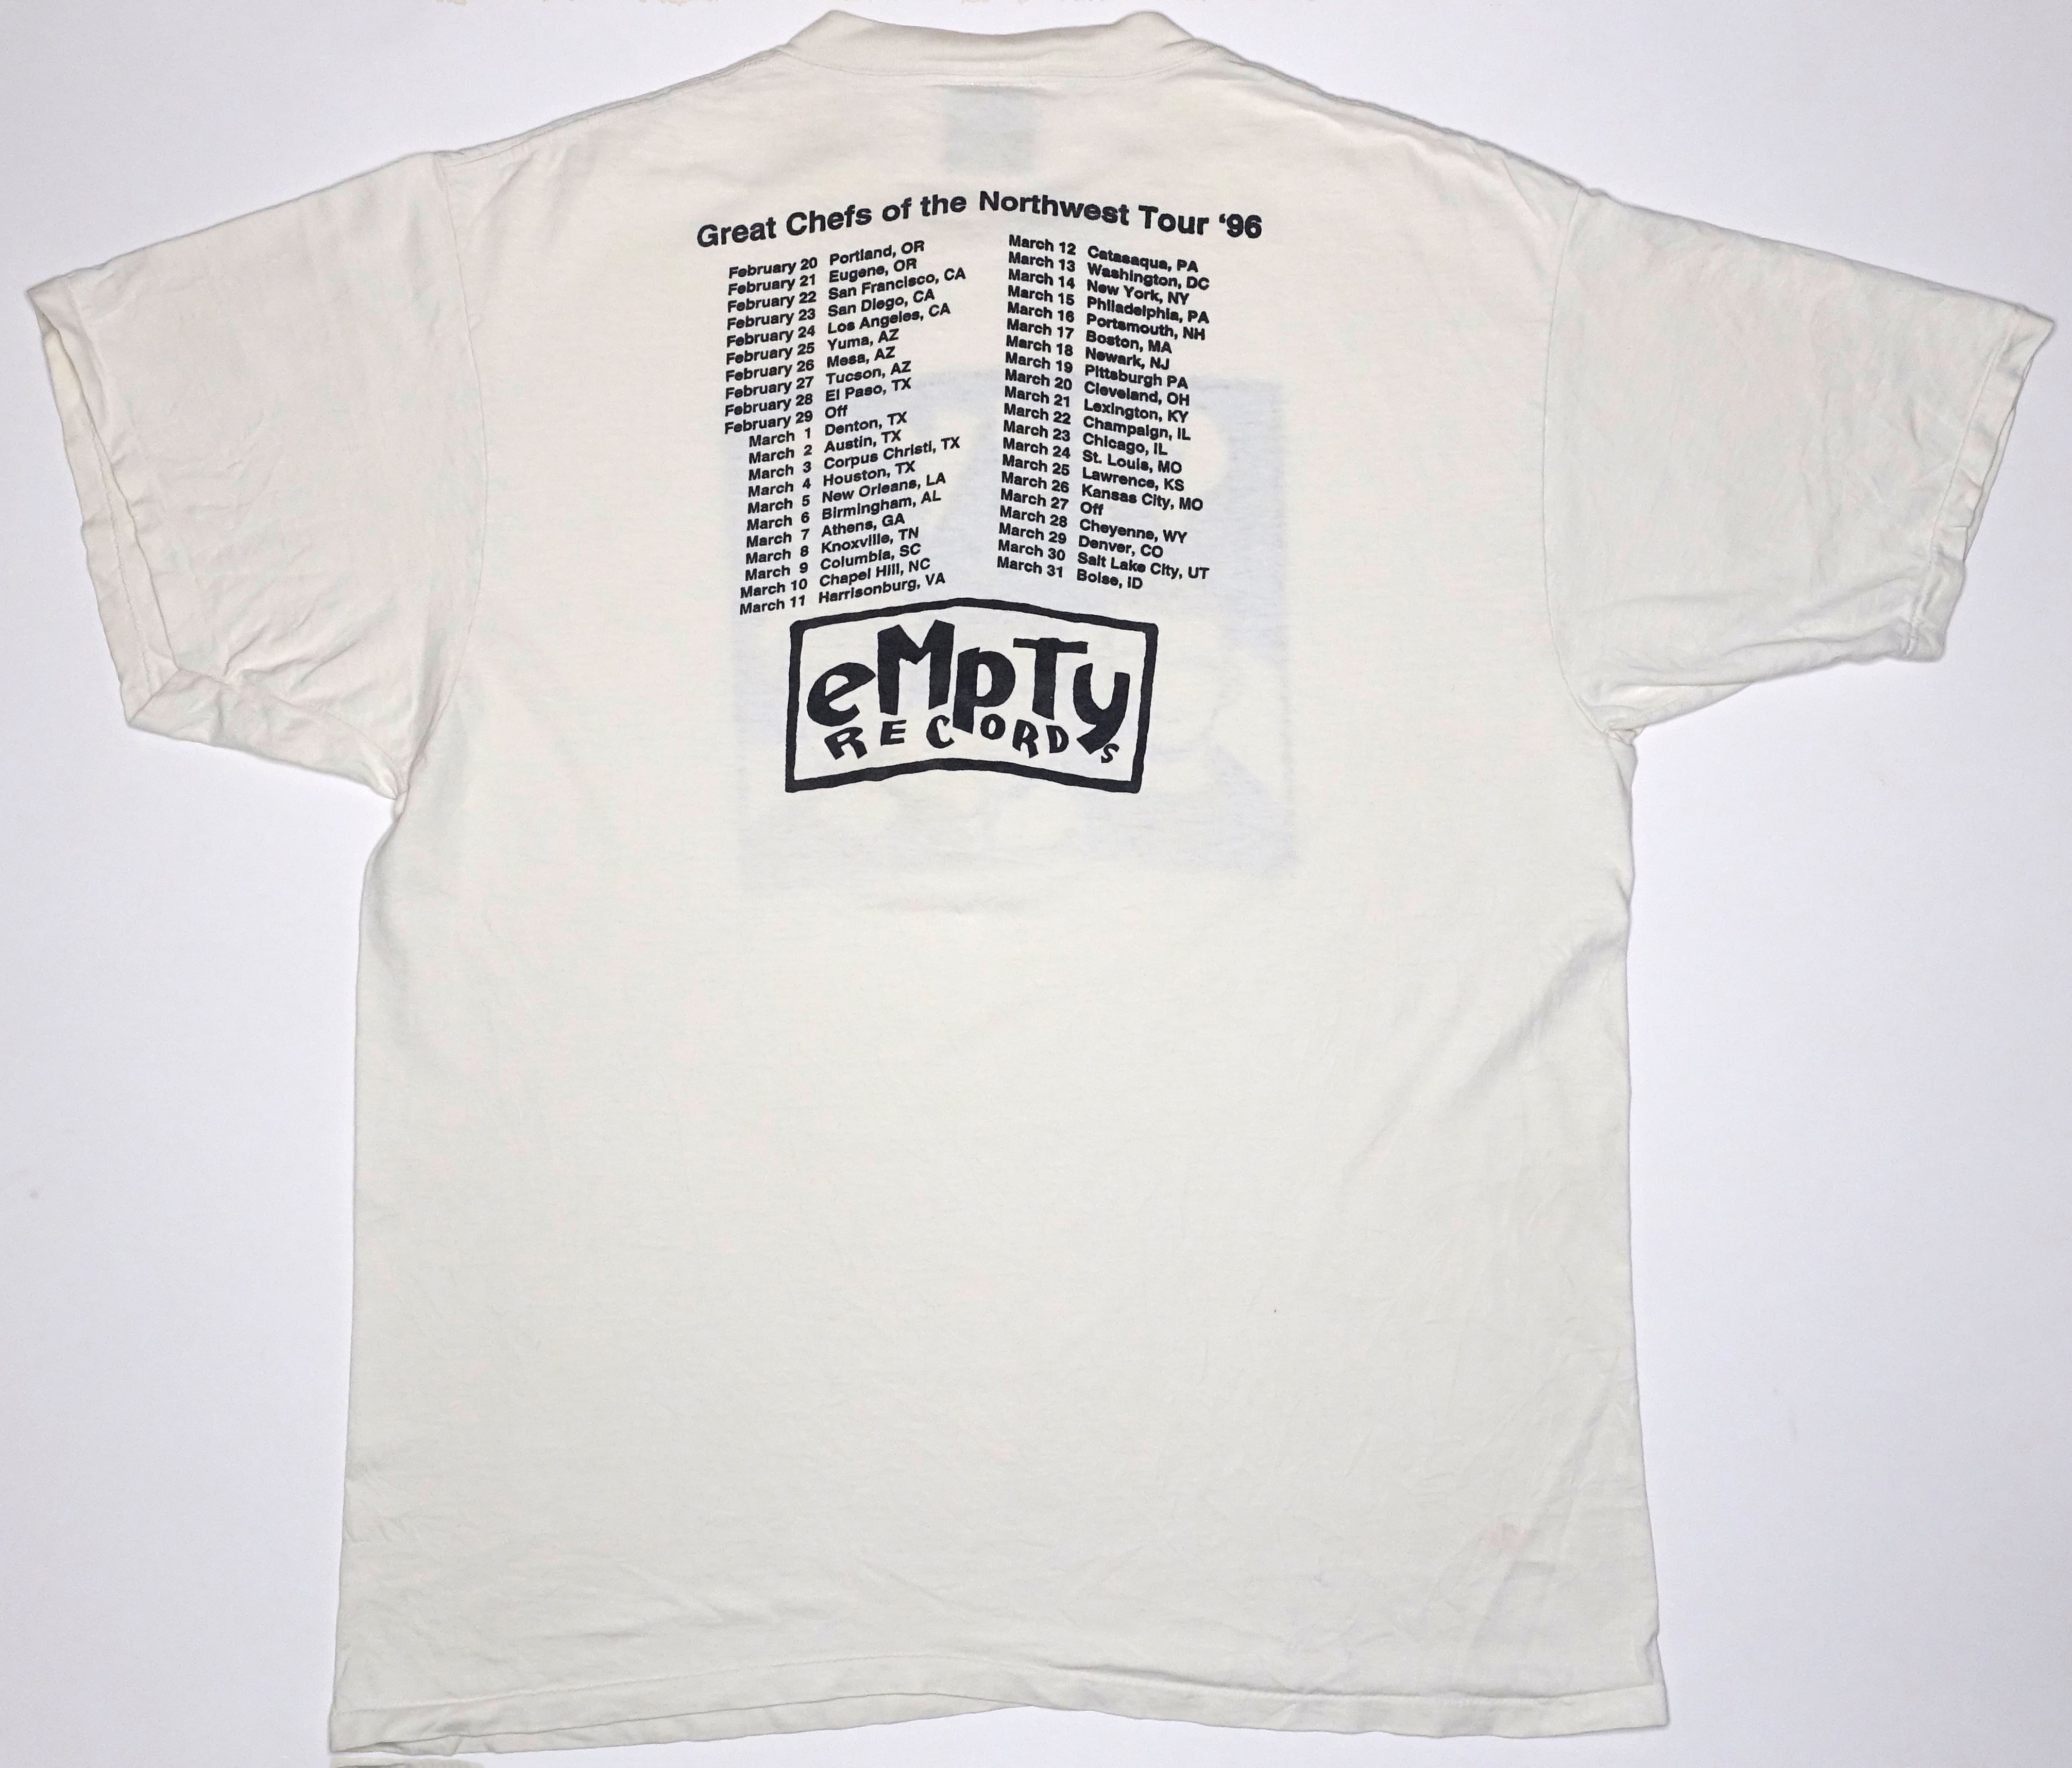 Sicko - Count Me Out /  Great Chefs Of the Northwest 1996 Tour Shirt Size XL